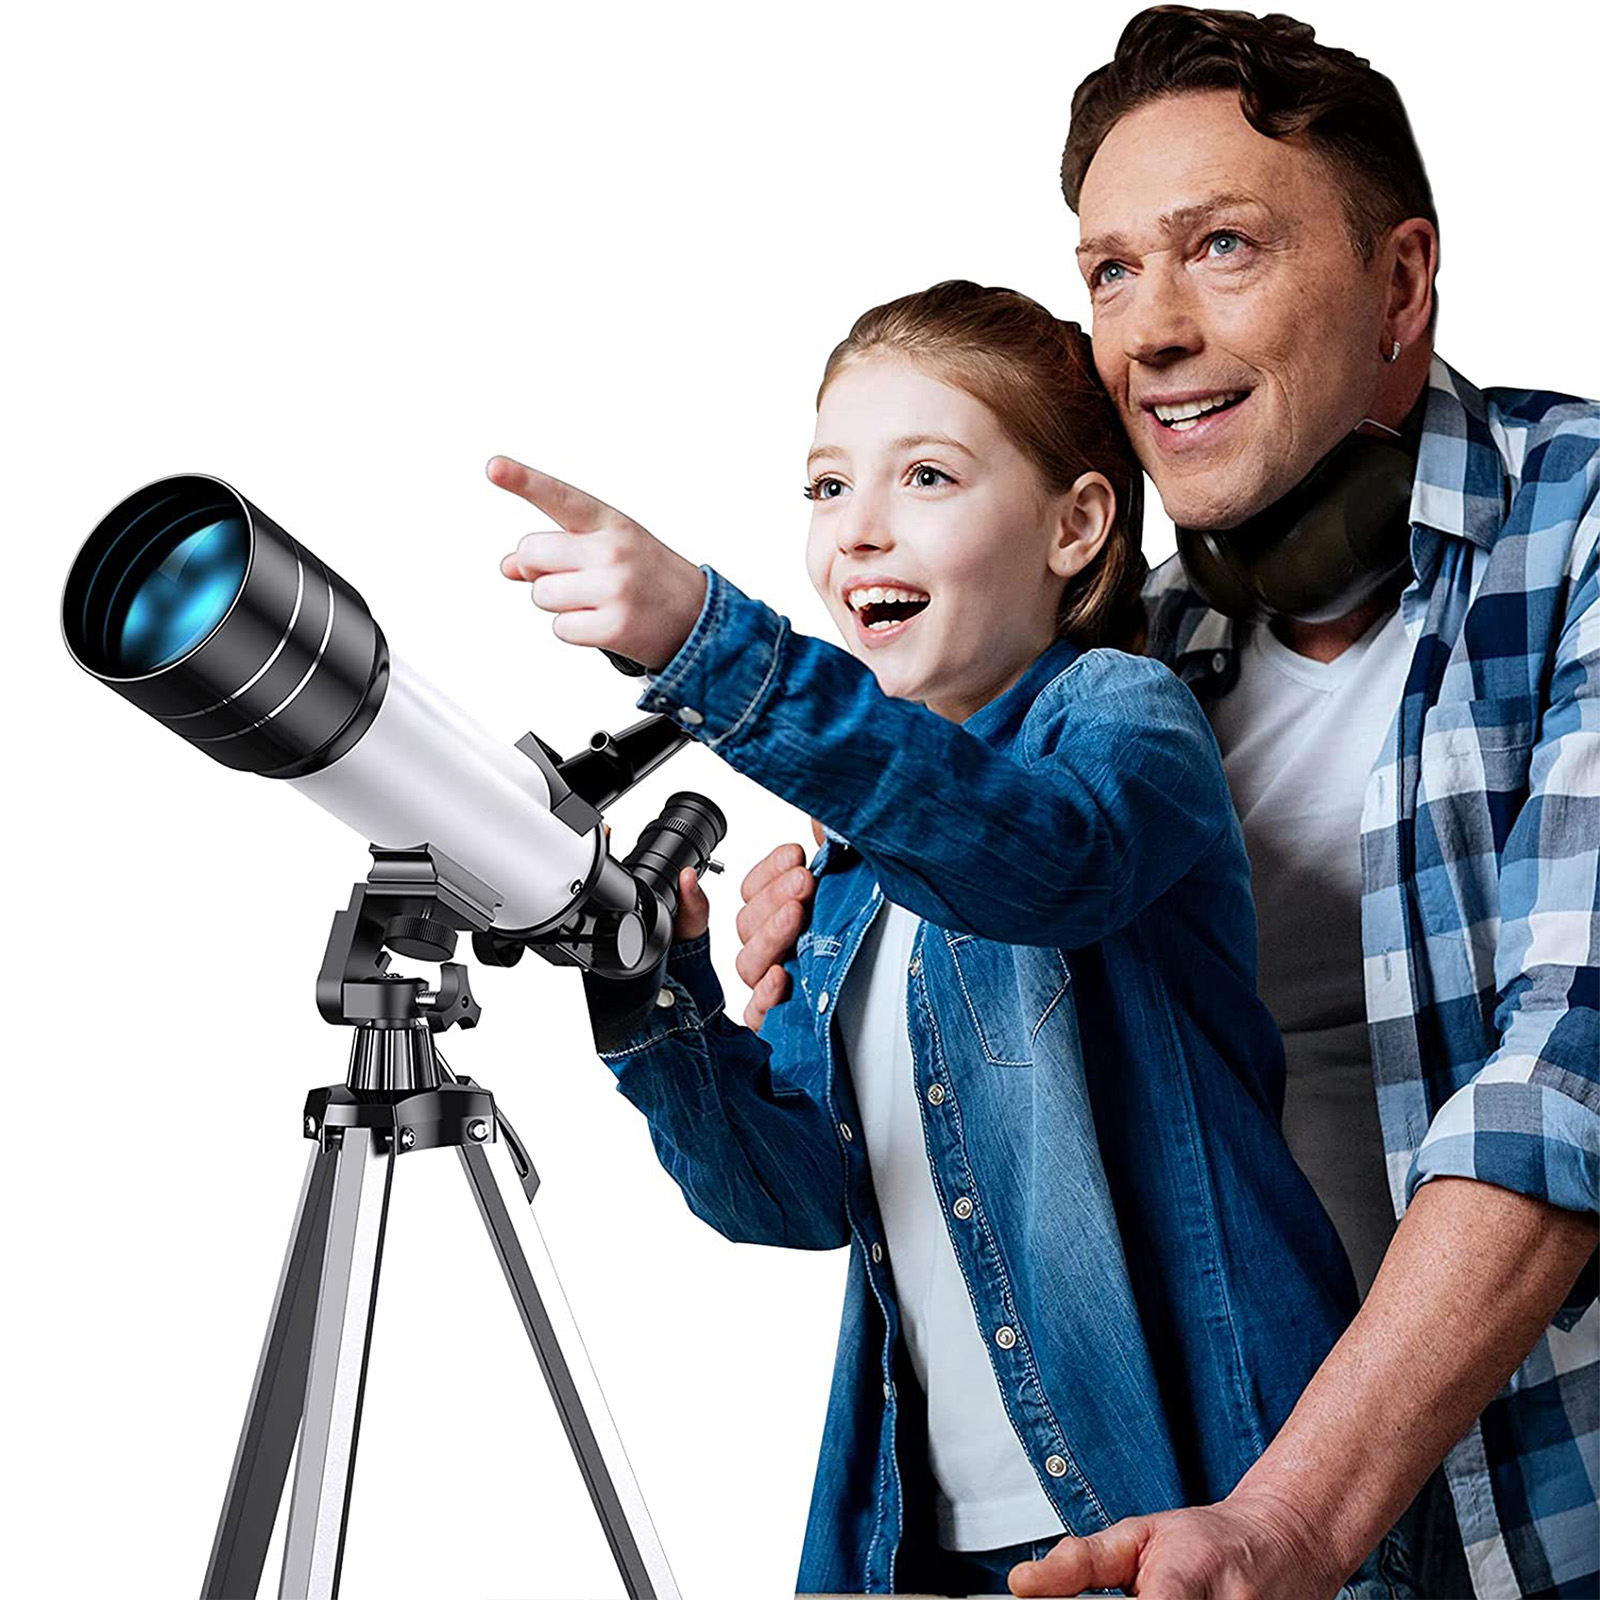 SUGIFT Telescope for Kids and Beginners 70mm Aperture 400mm AZ Mount Telescope with Tripod, Silver - image 2 of 7